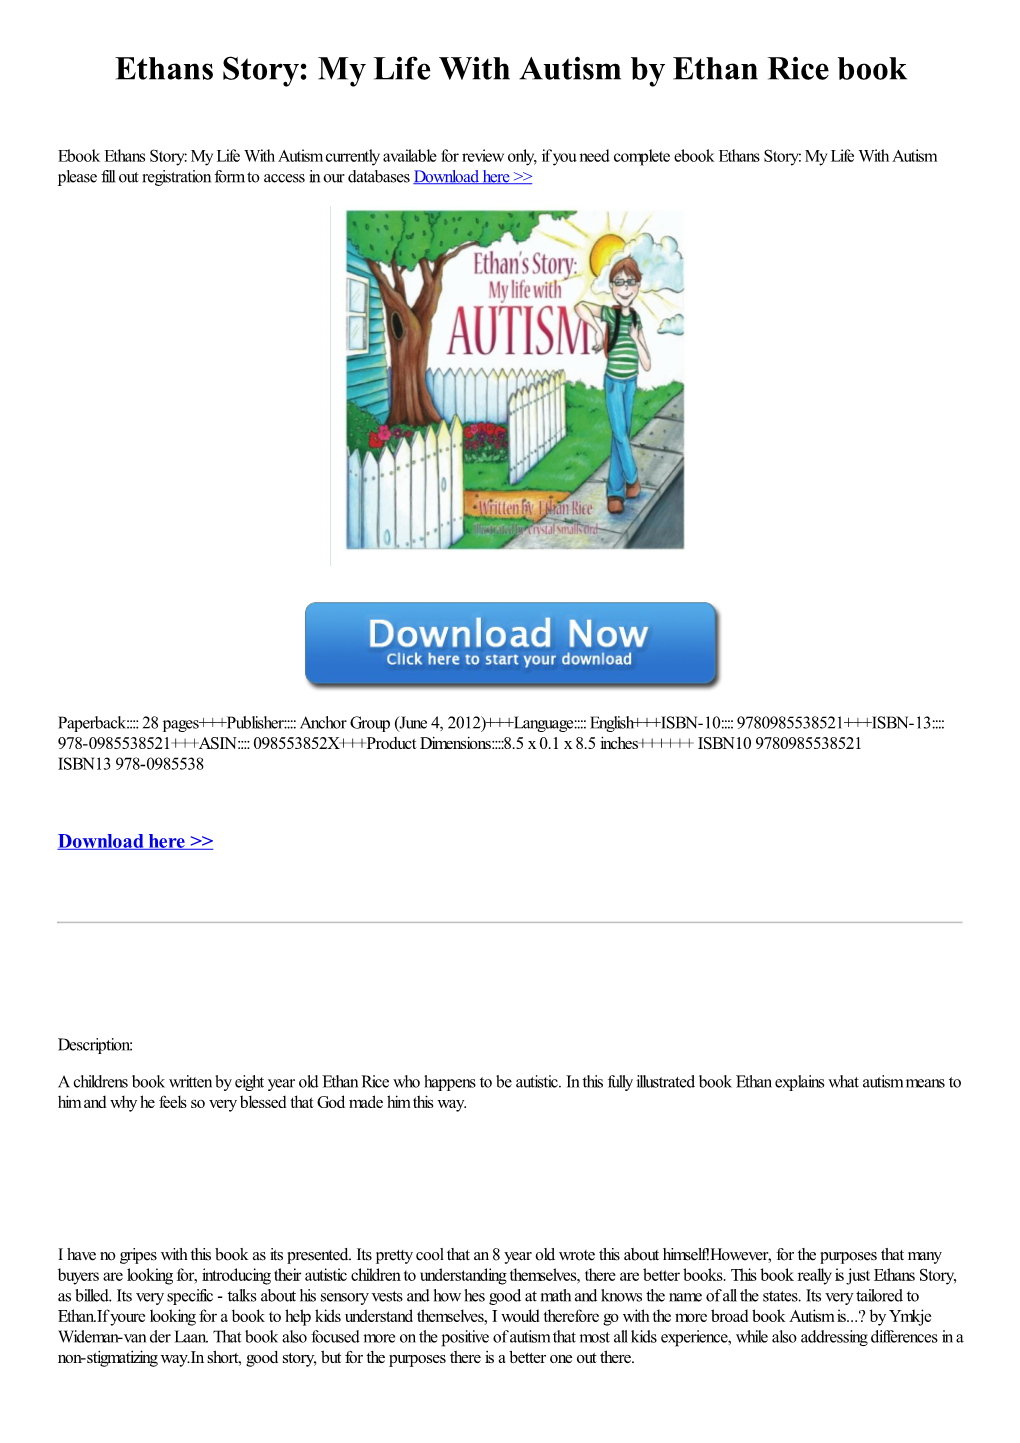 Download Ebook Ethans Story: My Life with Autism by Ethan Rice